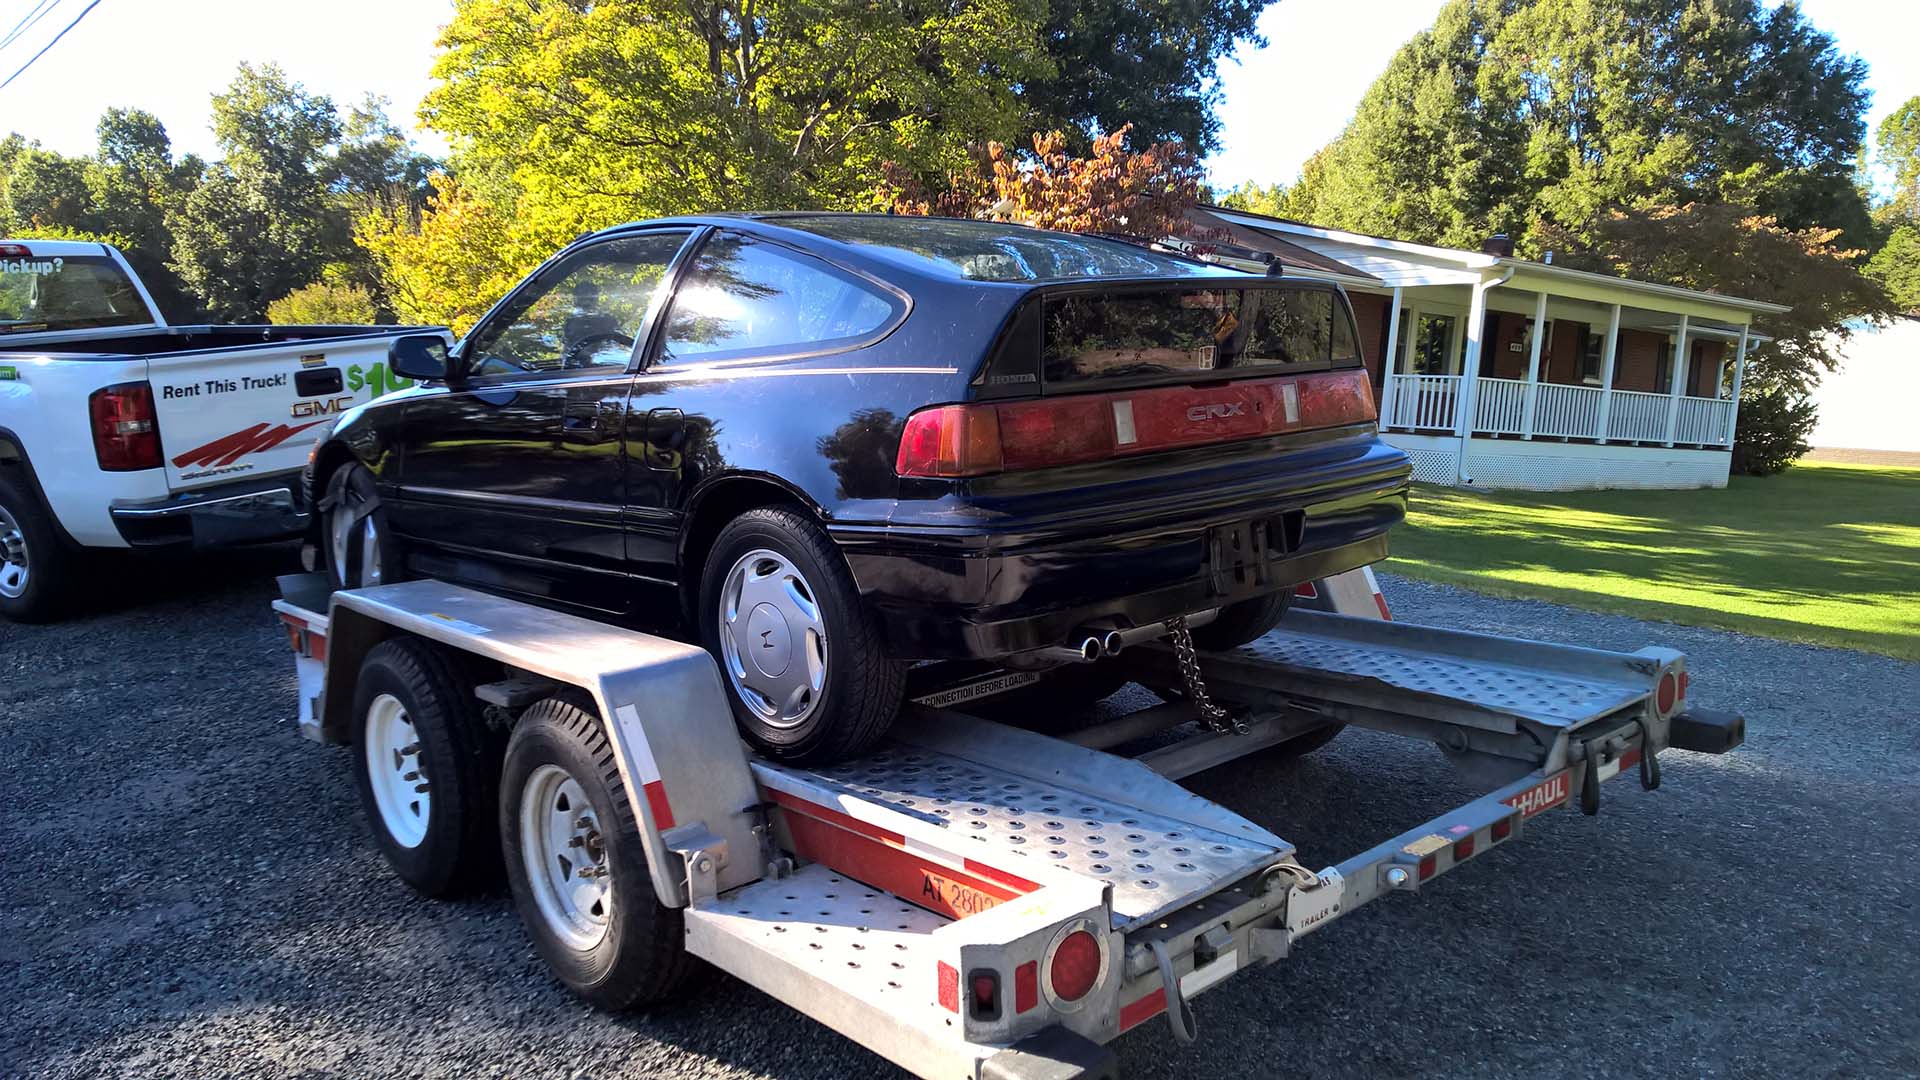 Towing the CRX